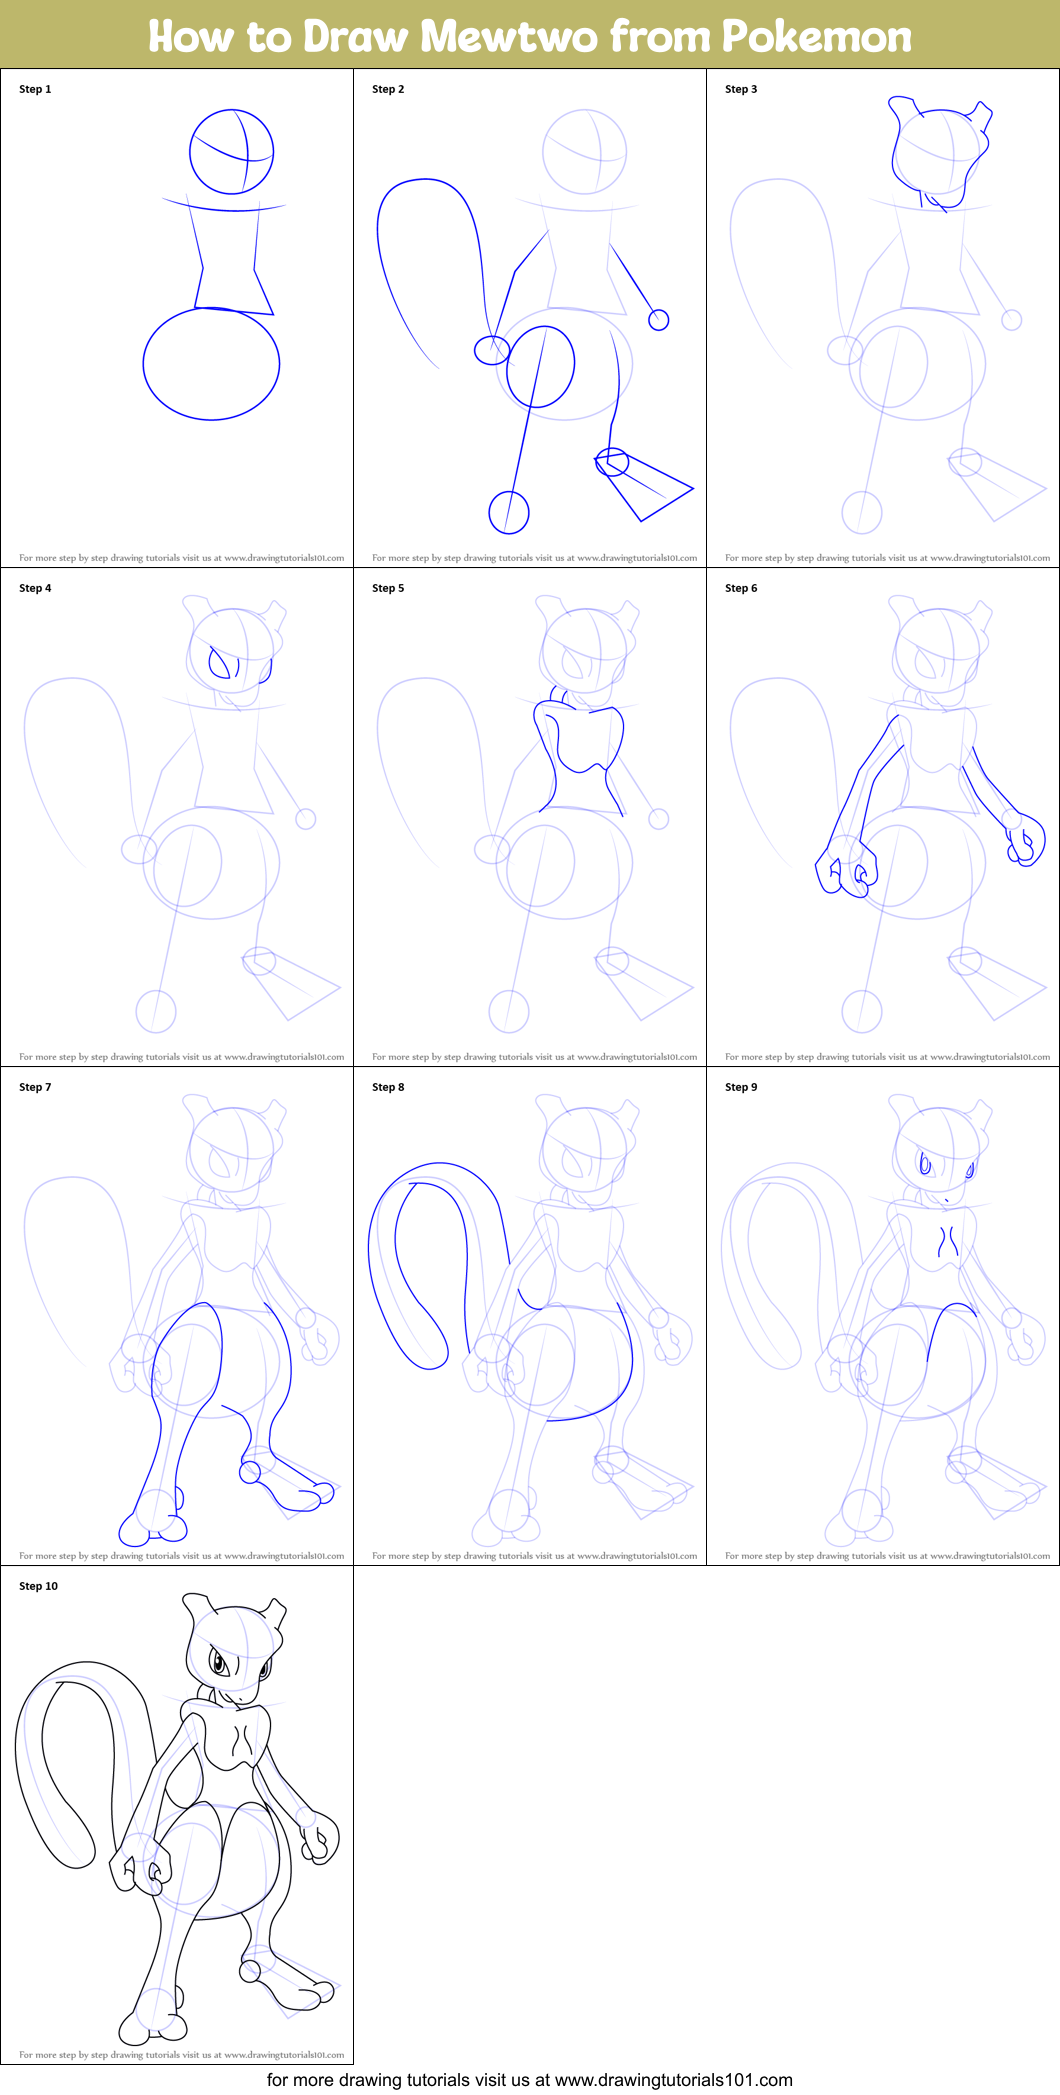 How to Draw Mewtwo from Pokemon printable step by step drawing sheet